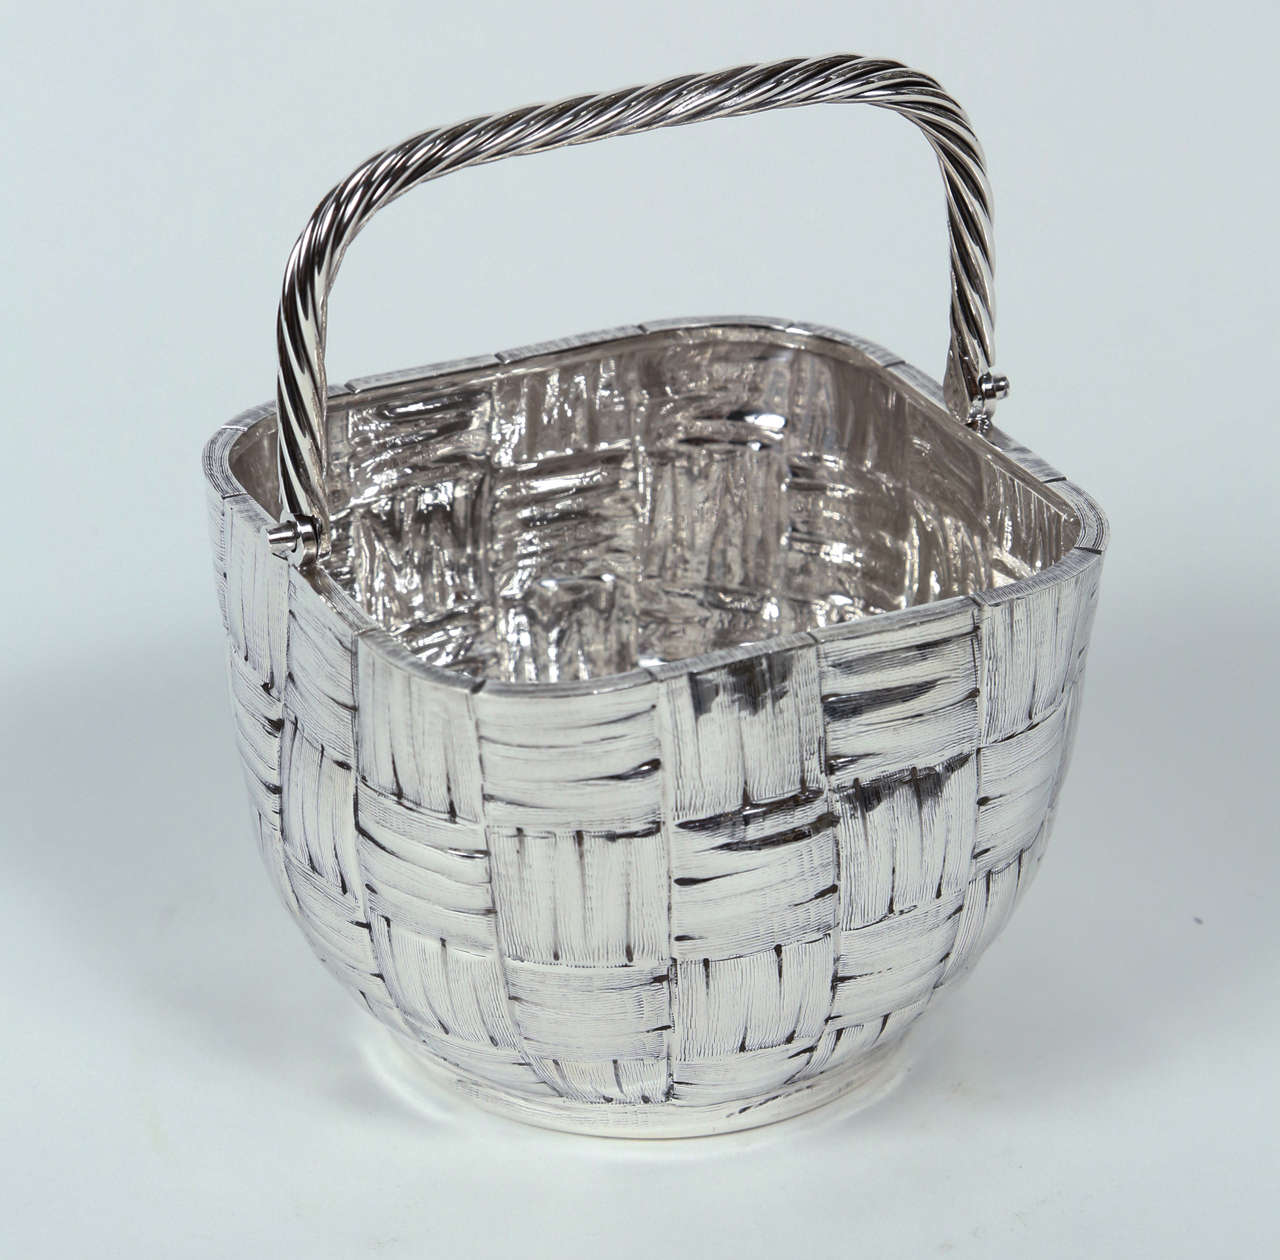 A chic and beautifully detailed Italian Sterling Basket with a moveable handle by Milan-based silversmith Fratelli Cacchione. The bottom of the basket has multiple marks, including the F.C. makers mark, both 